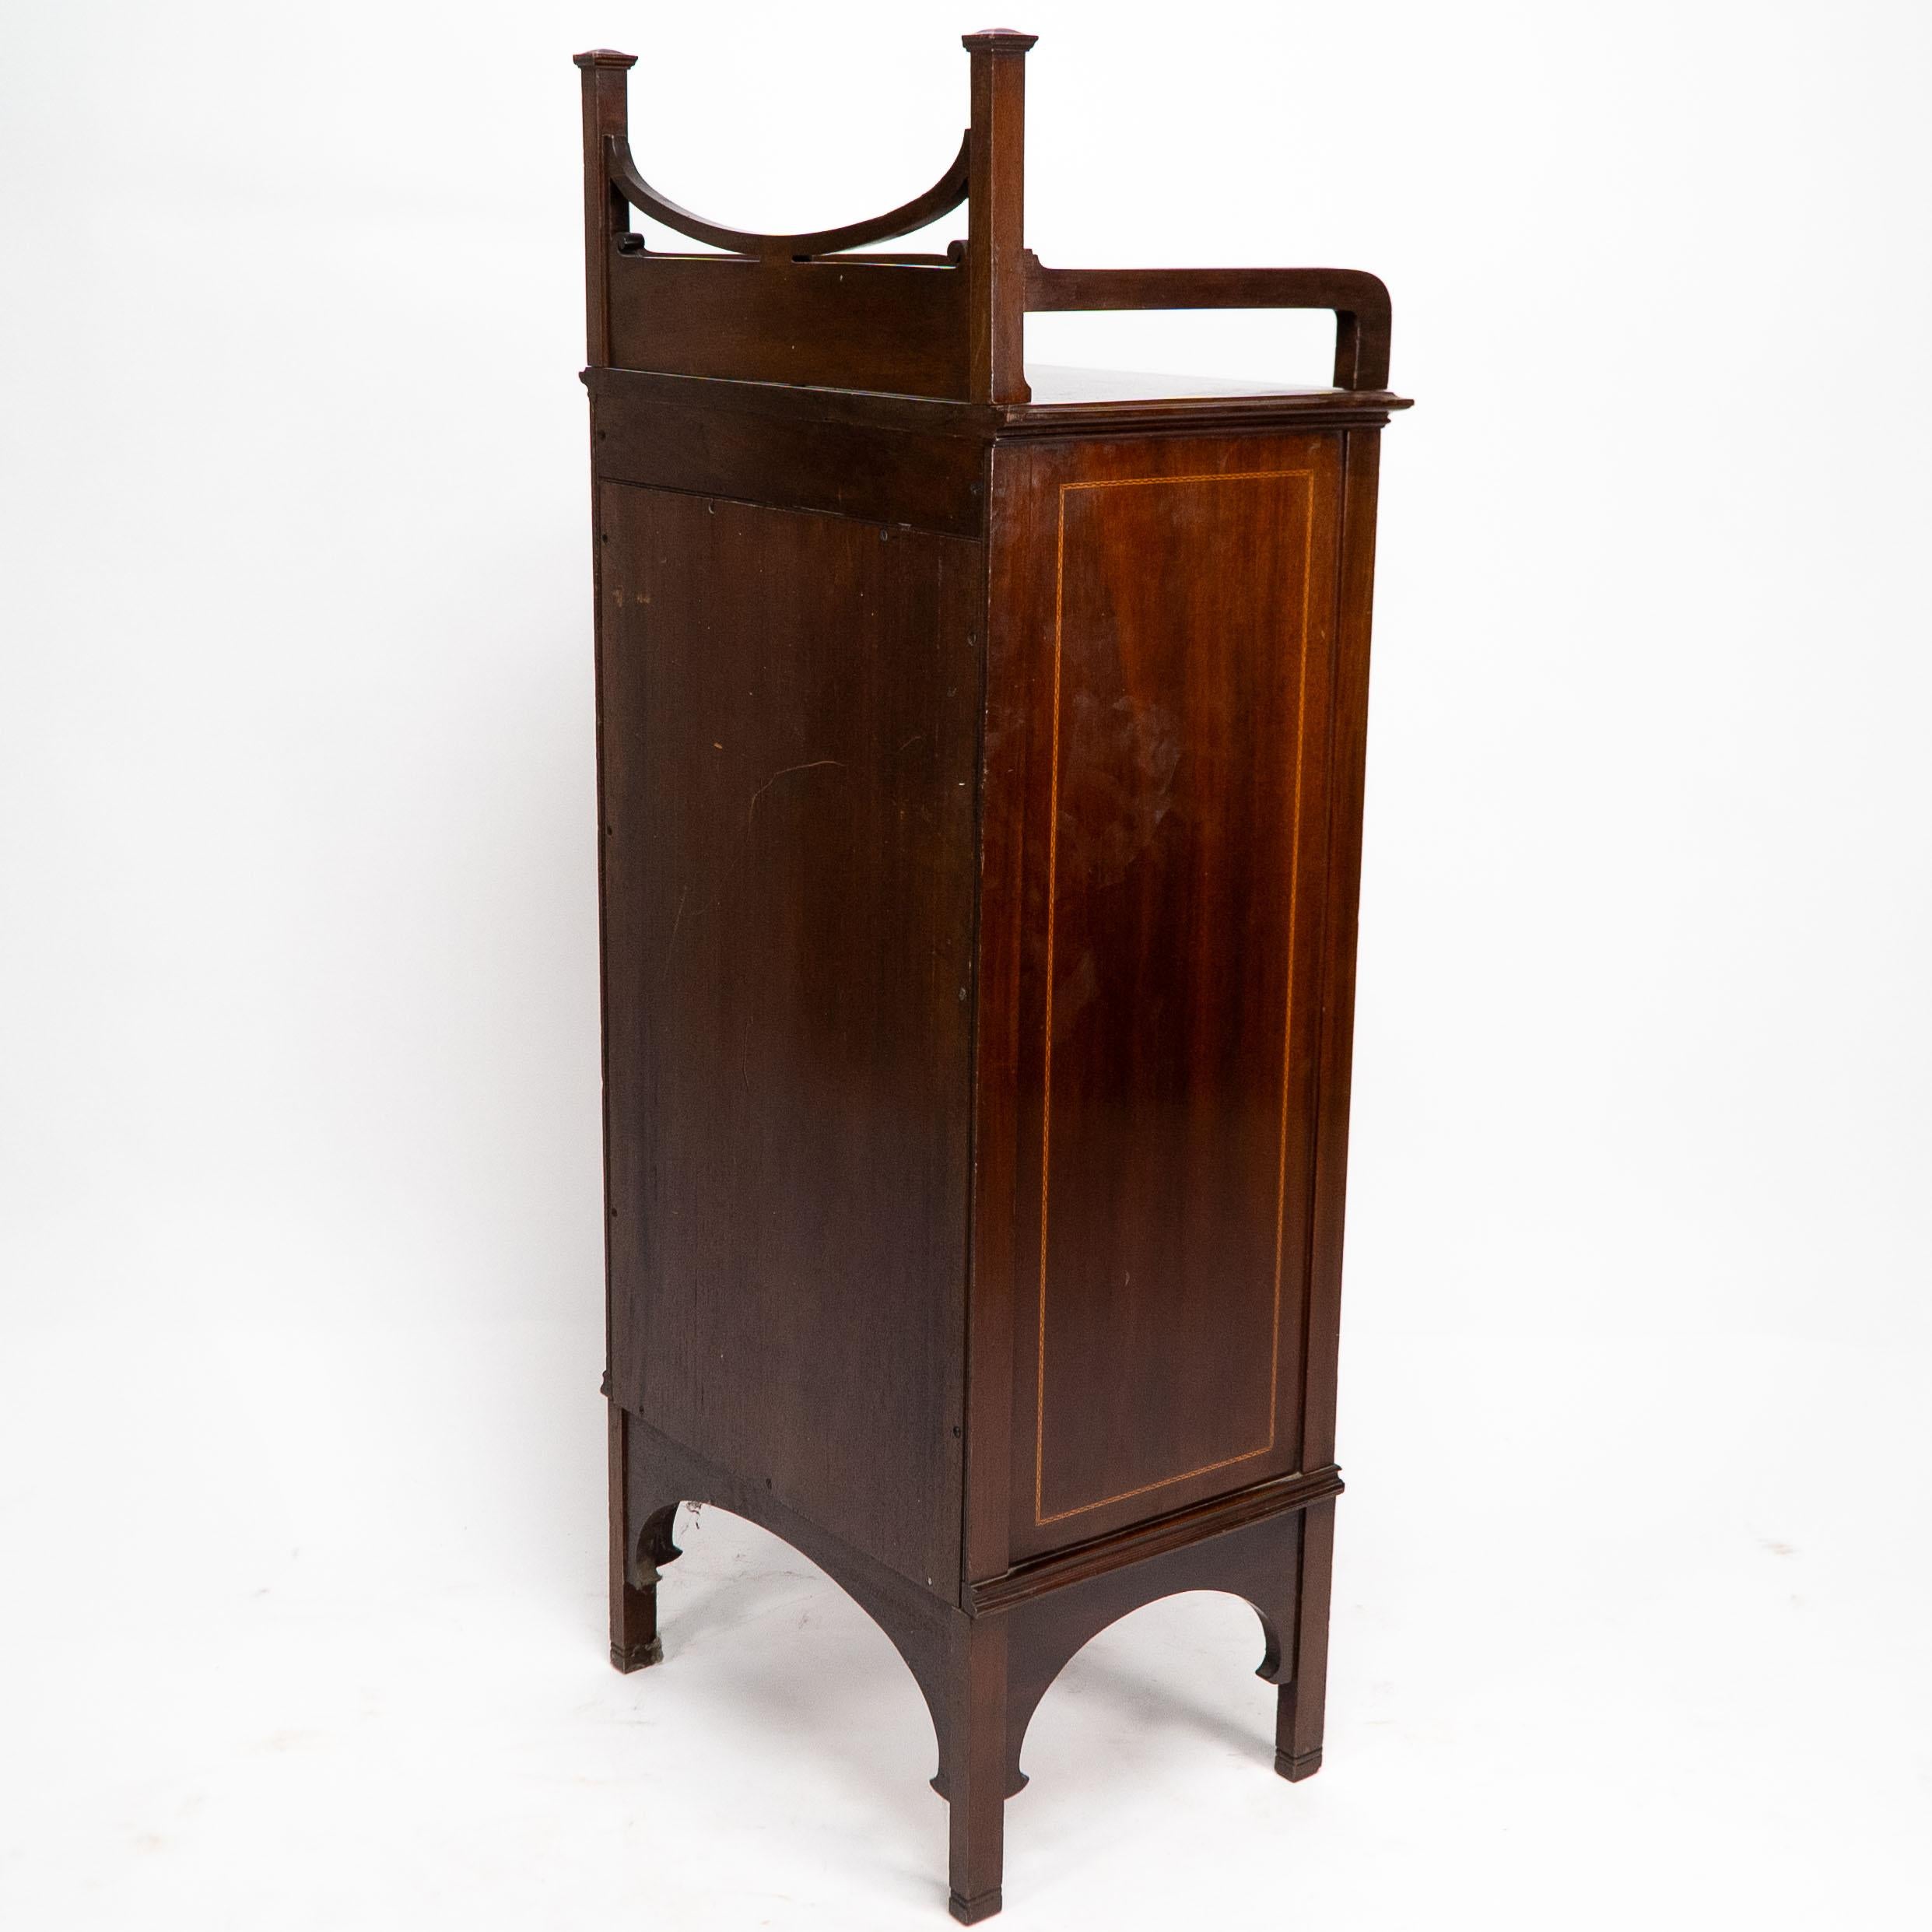 A Petite Arts & Crafts Mahogany Display Cabinet in the Anglo-Japanese Style. For Sale 5